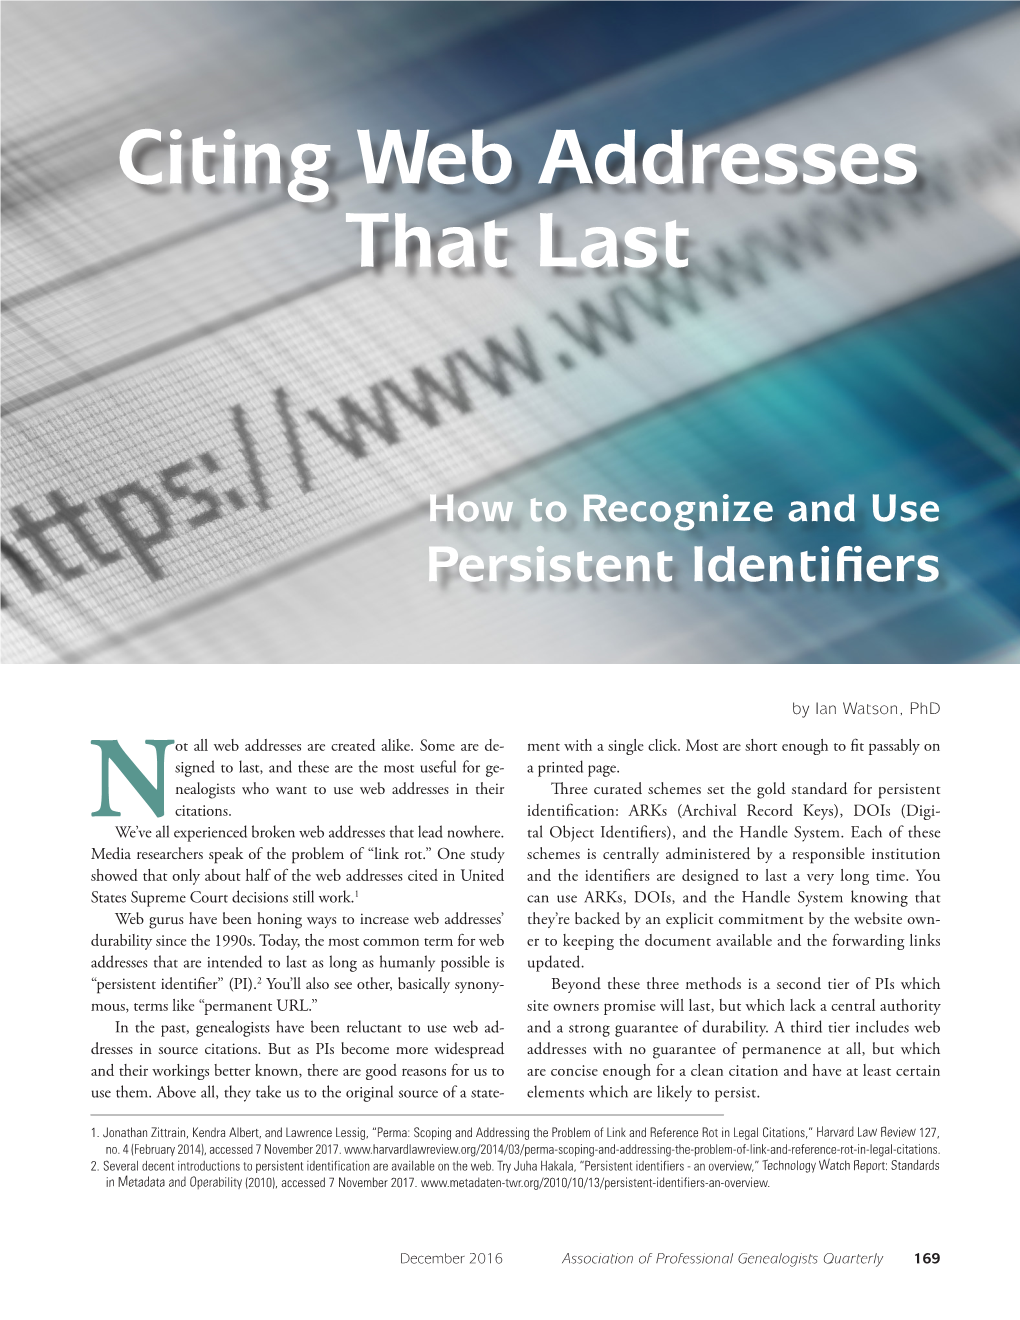 Citing Web Addresses That Last: How to Recognize